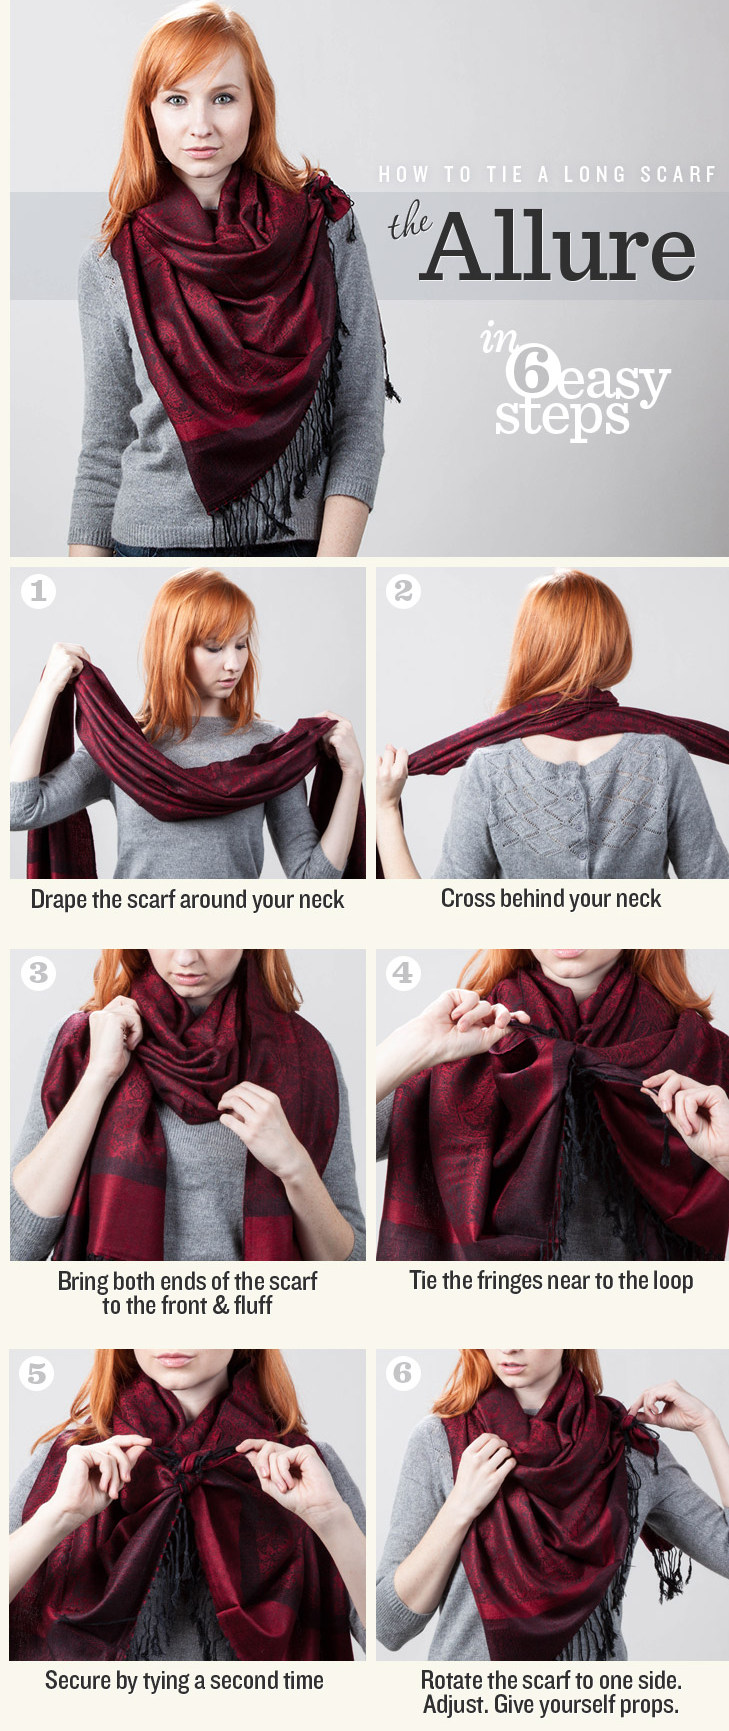 17 Stylish and Easy Ways To Tie A Scarf